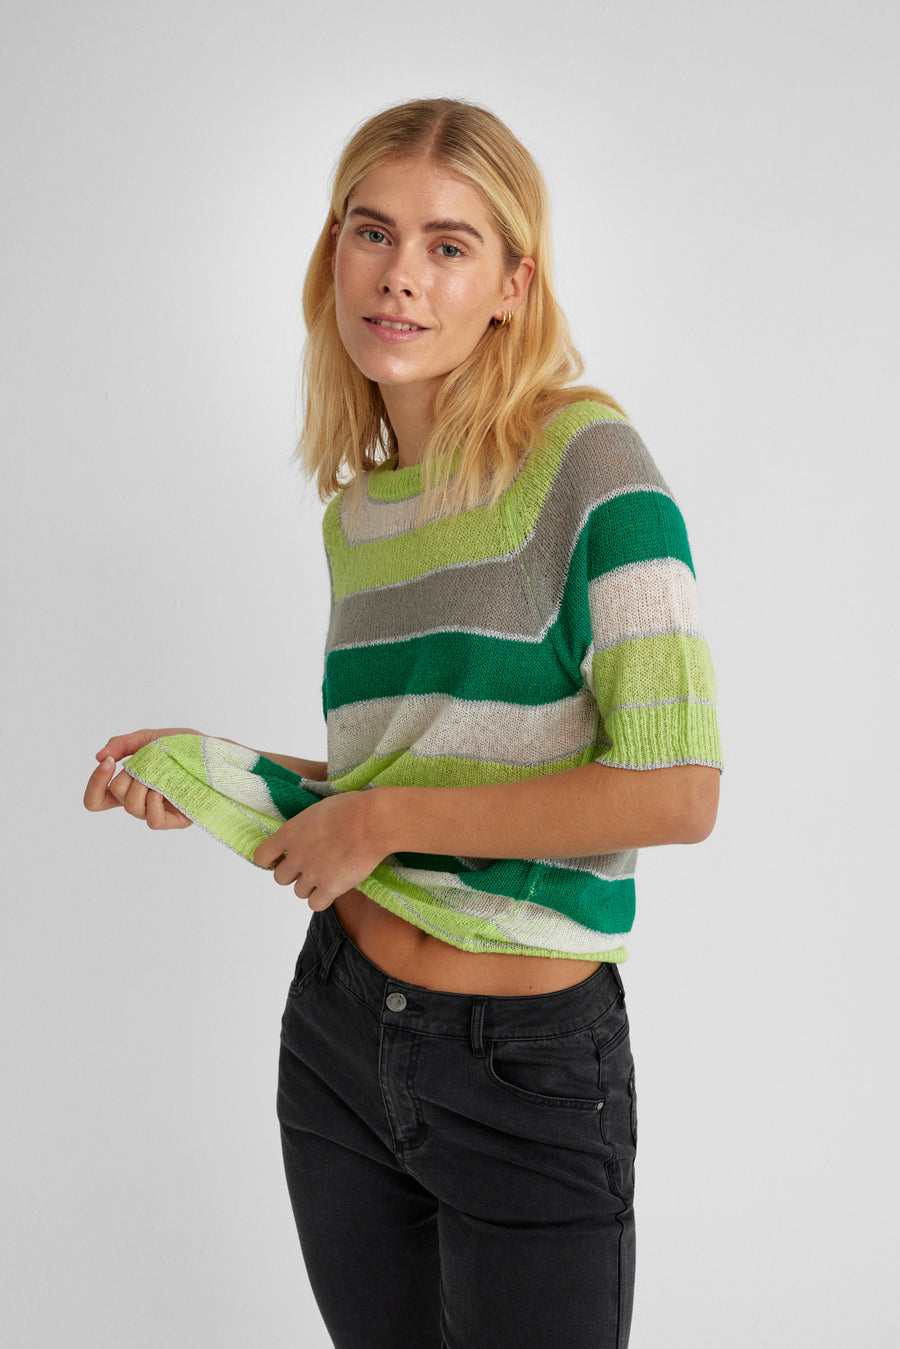 FQCLAIN - BLOUSE WITH SHIMMERY STRIPING - GREEN